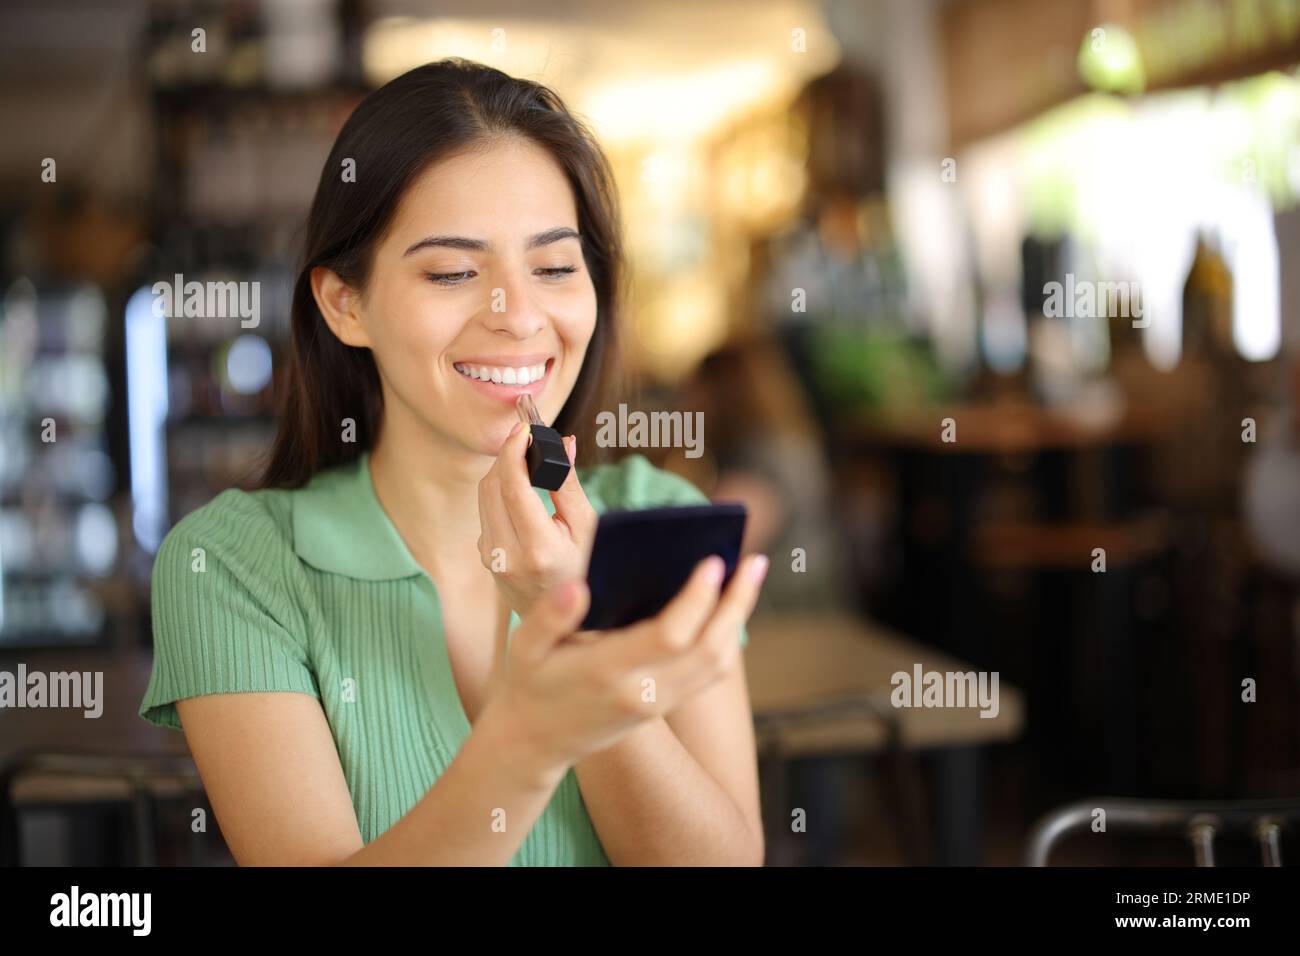 Happy woman painting lips sitting in a restaurant waiting in a date Stock Photo